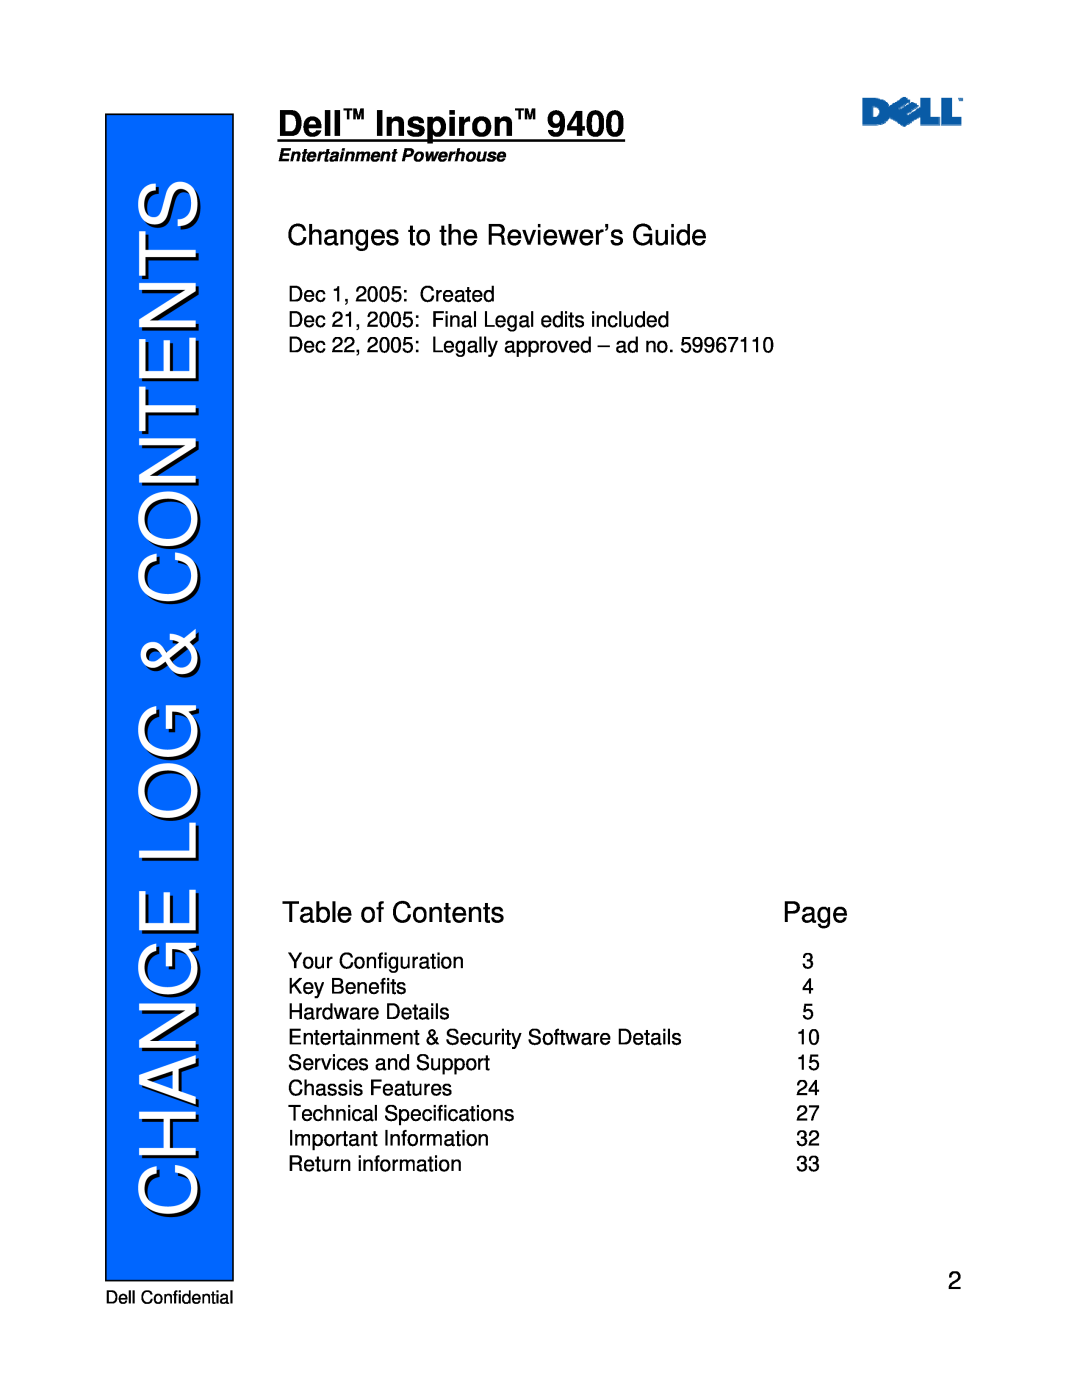 Dell 9400 manual Change Log & Contents, Dell Inspiron, Changes to the Reviewer’s Guide, Table of Contents, Page 